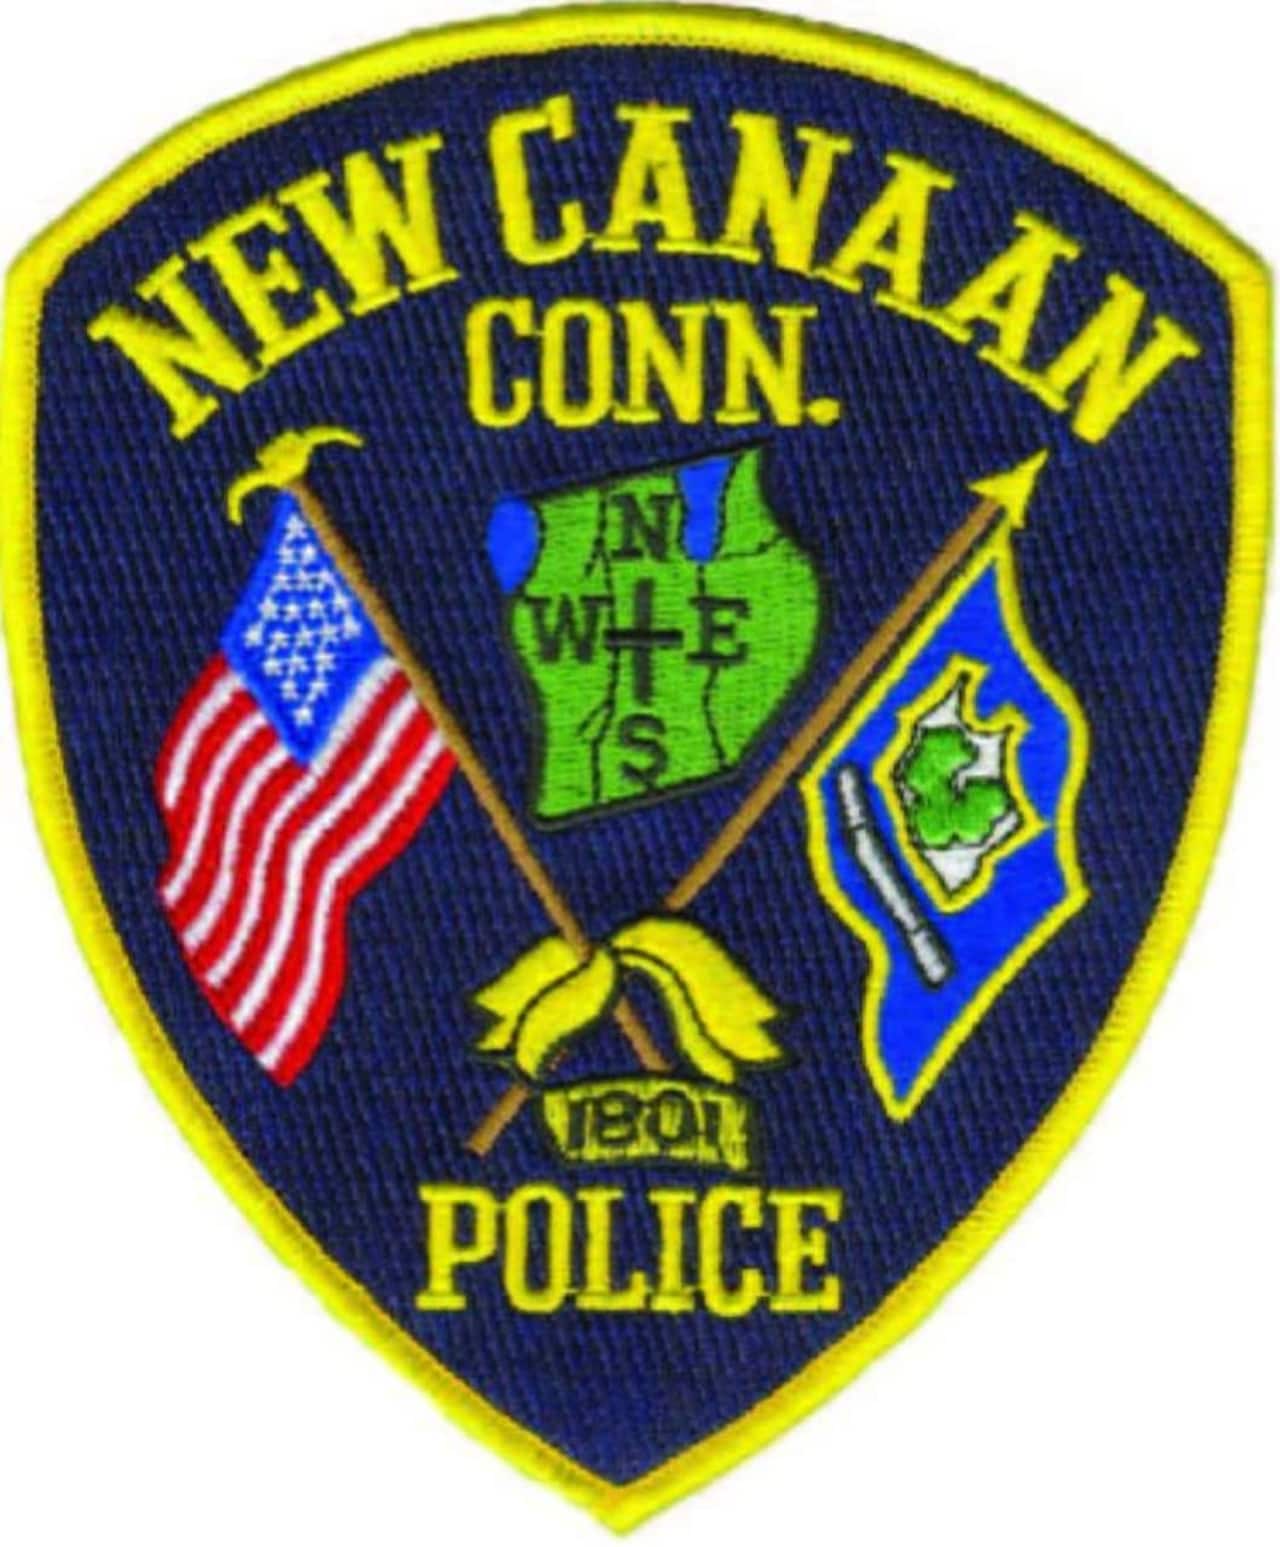 A New Canaan man was charged with leaving threatening notes on a counter at Starbucks in town.